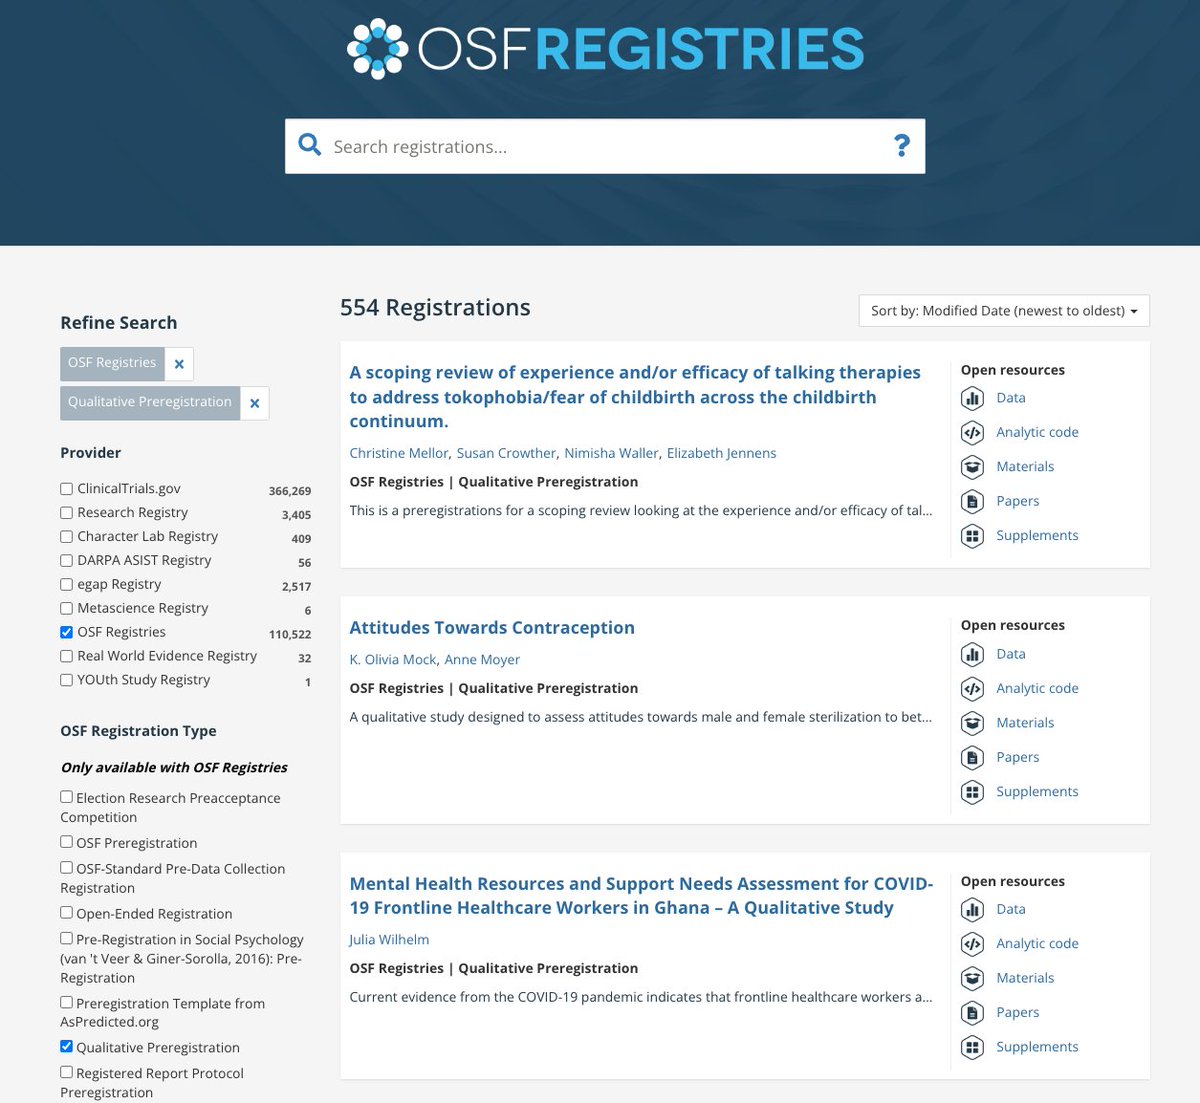 The qualitative preregistration template on OSF has been used more than 550 times. Three cheers for Tamarinde Haven and her collaborators for the delphi study that produced the template and to the researchers that are exploring its value for qual work. osf.io/registries/dis…